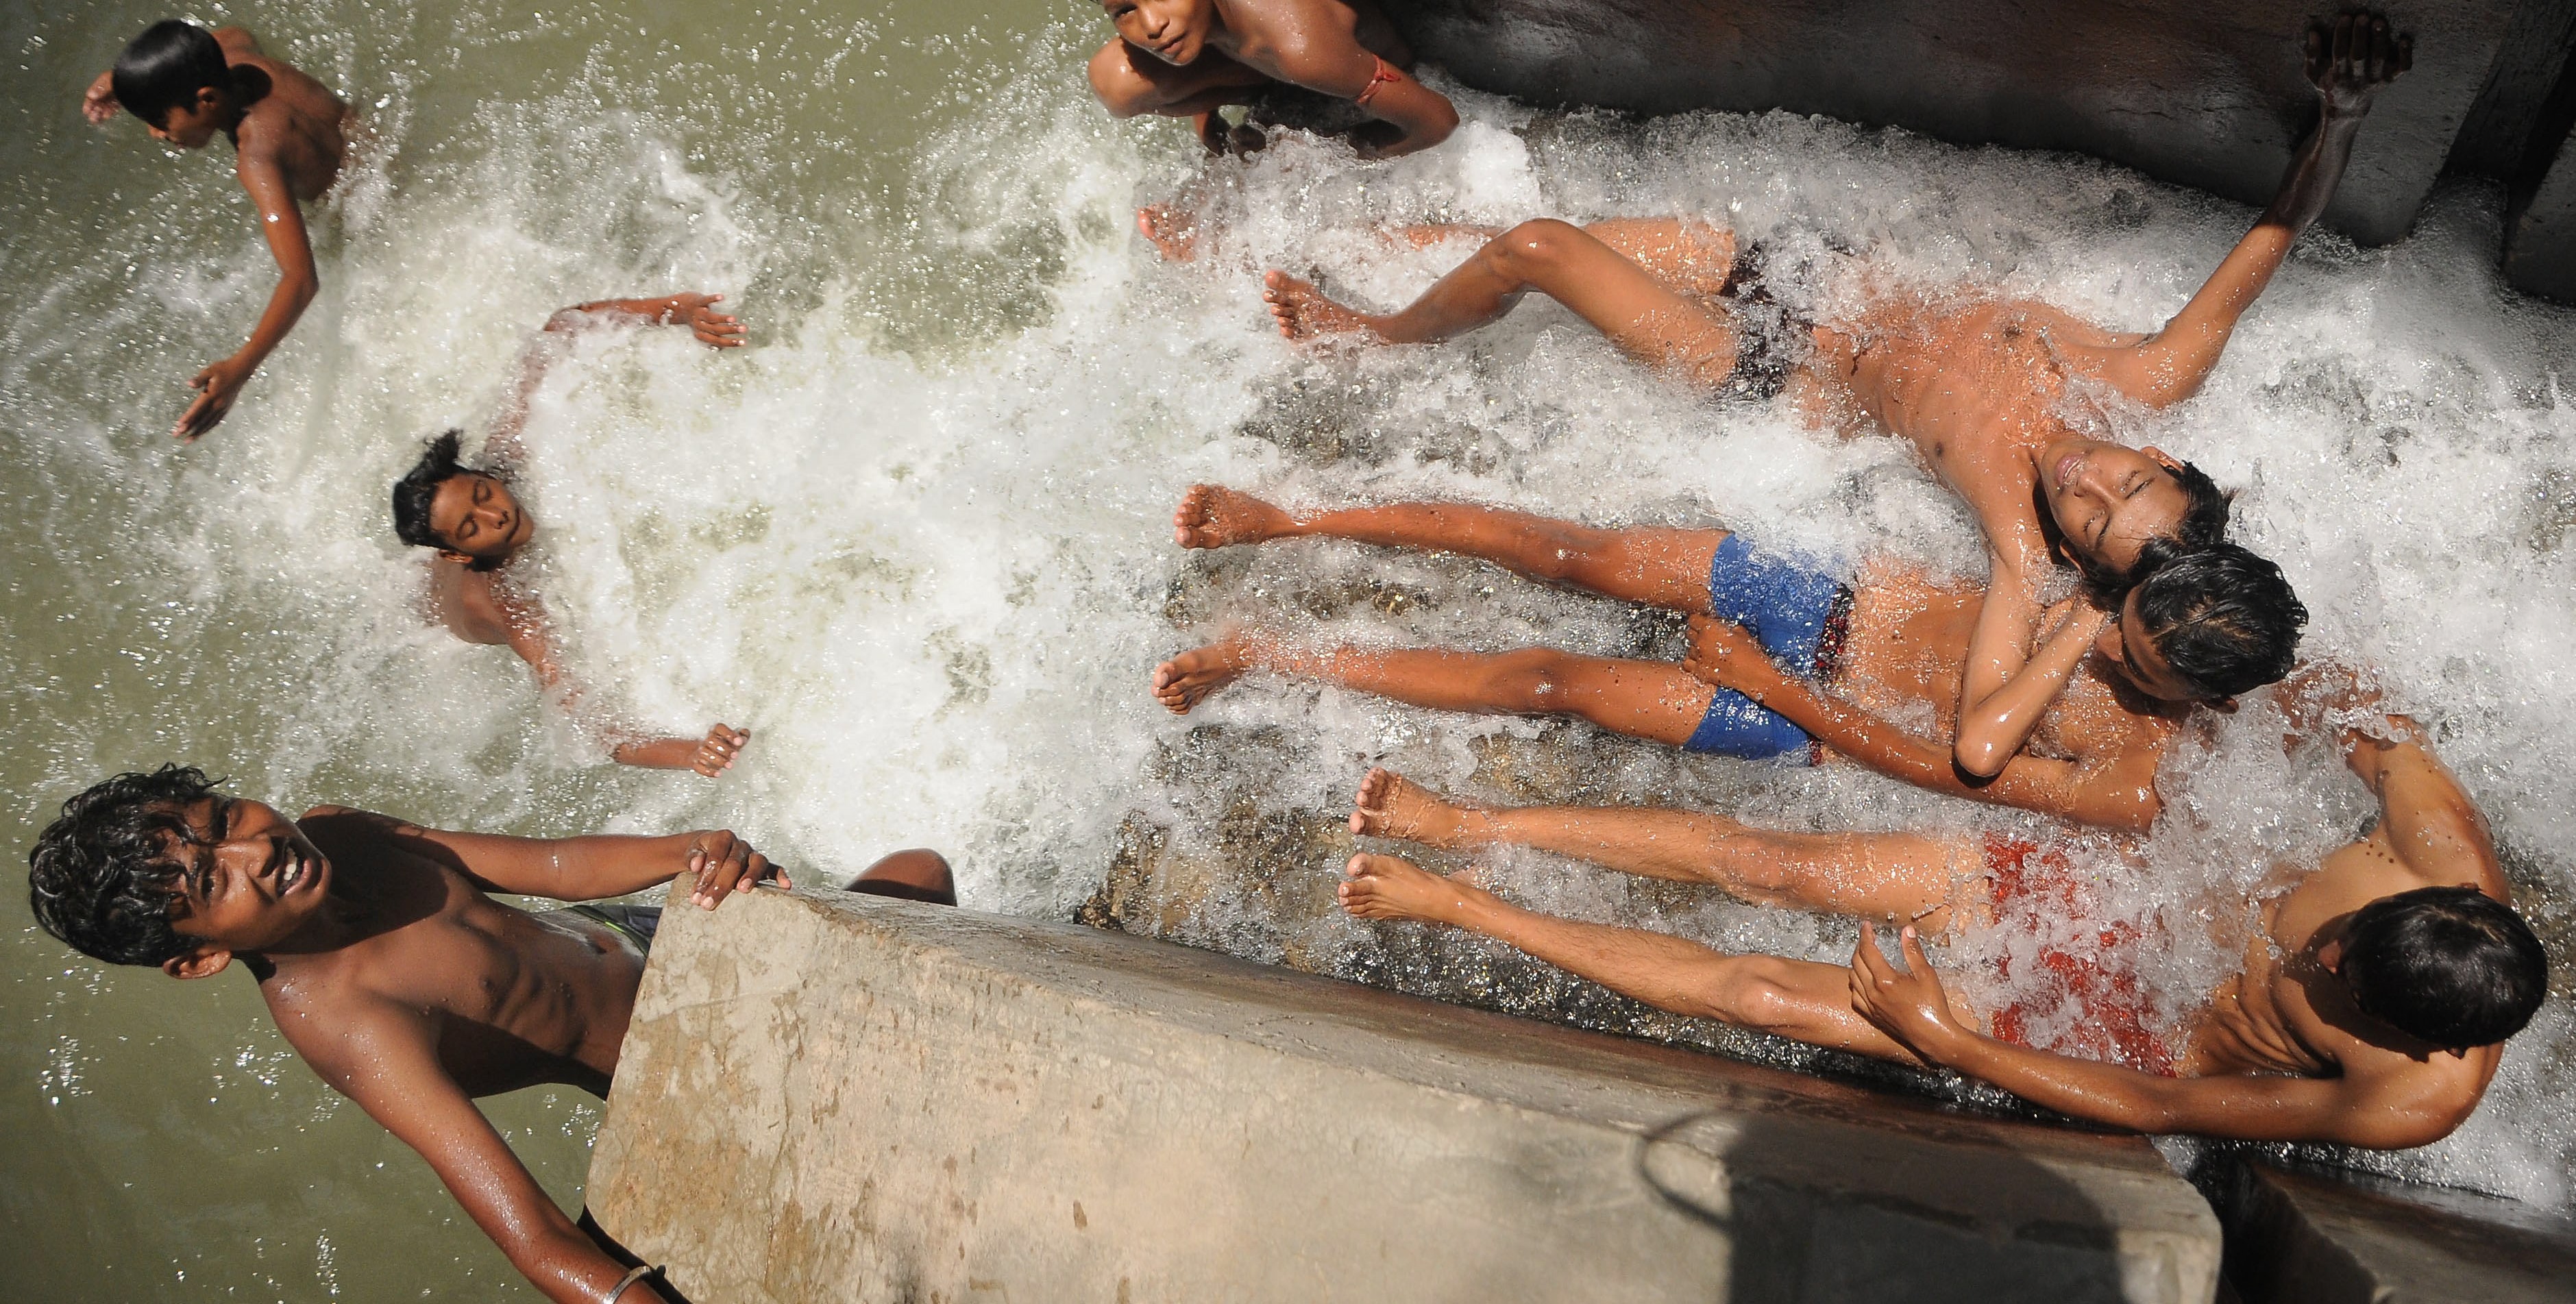 epa07638406 Indian boys cool off at a canal in New Delhi, India, 10 June 2019. The forecasts predict hot weather in the Indian capital with the maximum temperature at 46 degrees Celsius.   EPA/STR